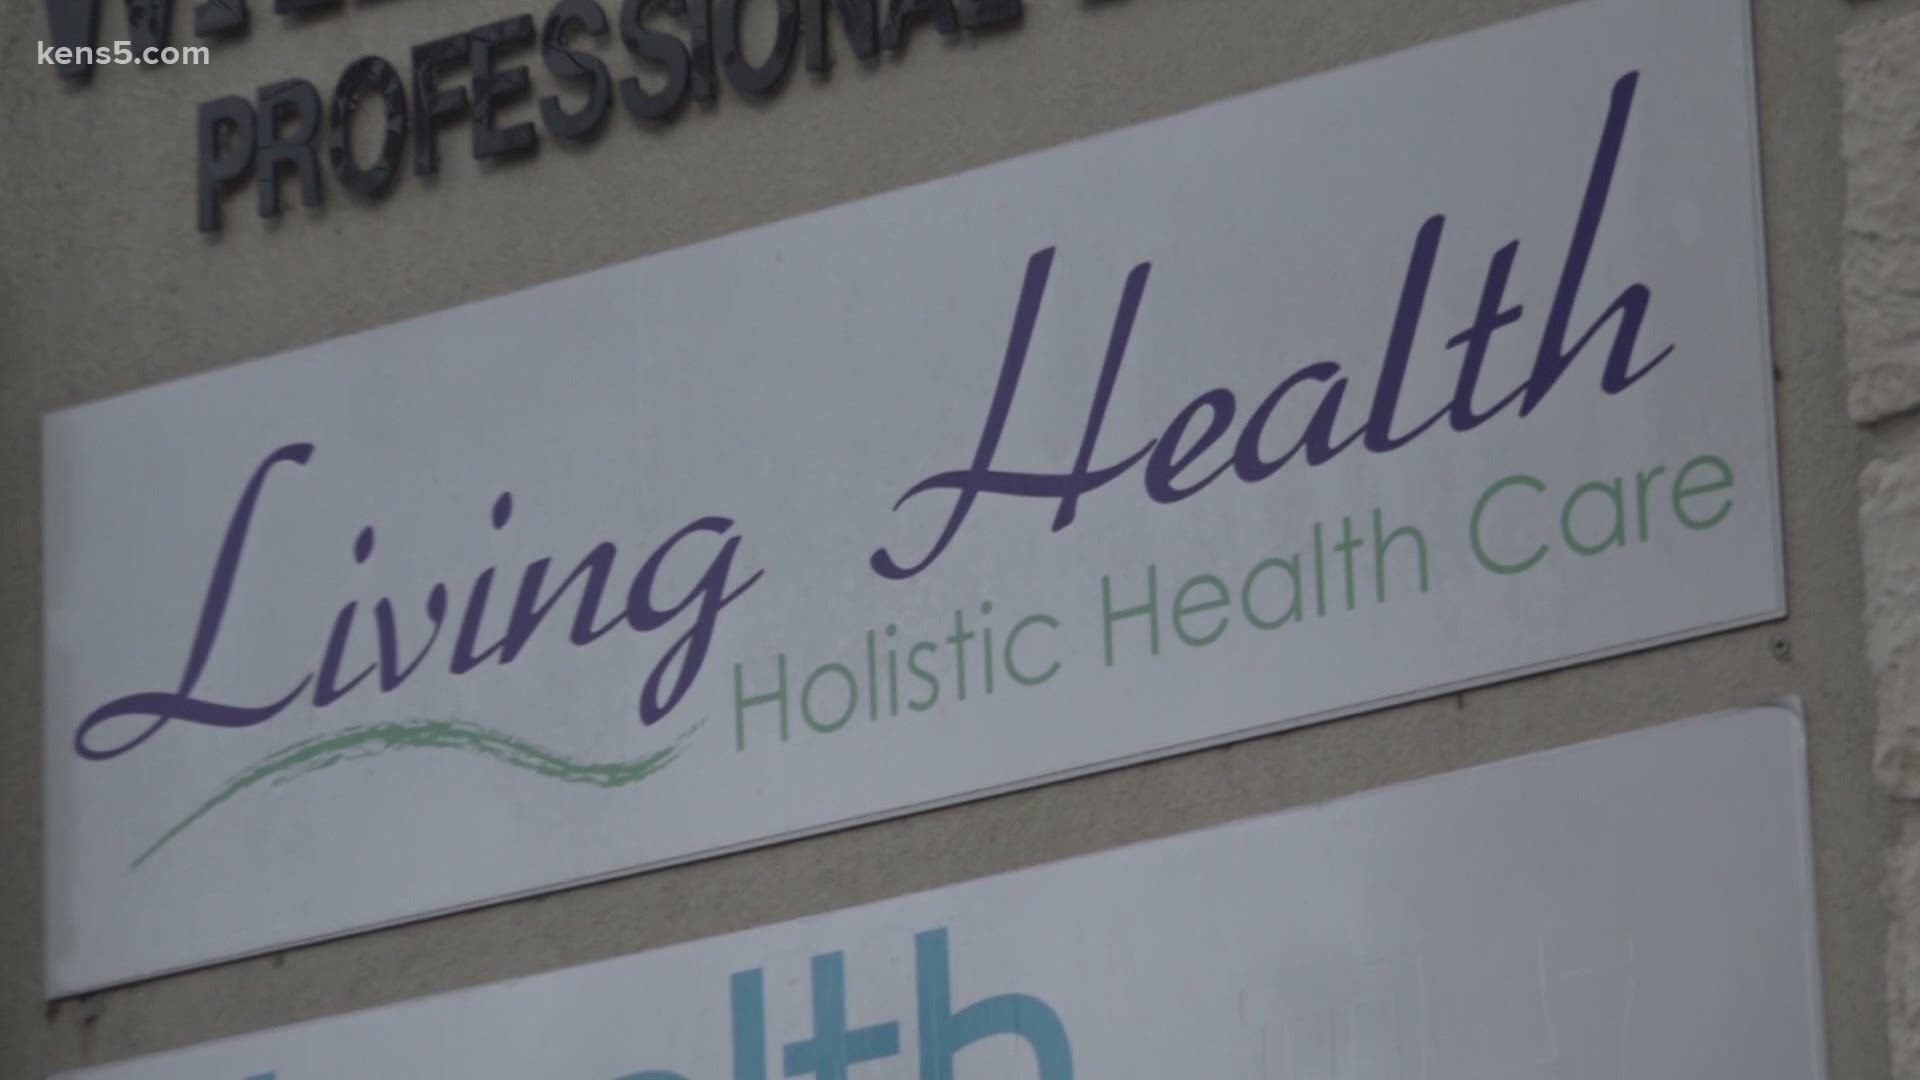 The FBI posted a warning on social media to Texans who may have gone to a holistic healthcare practitioner in New Braunfels to get tested for COVID-29.